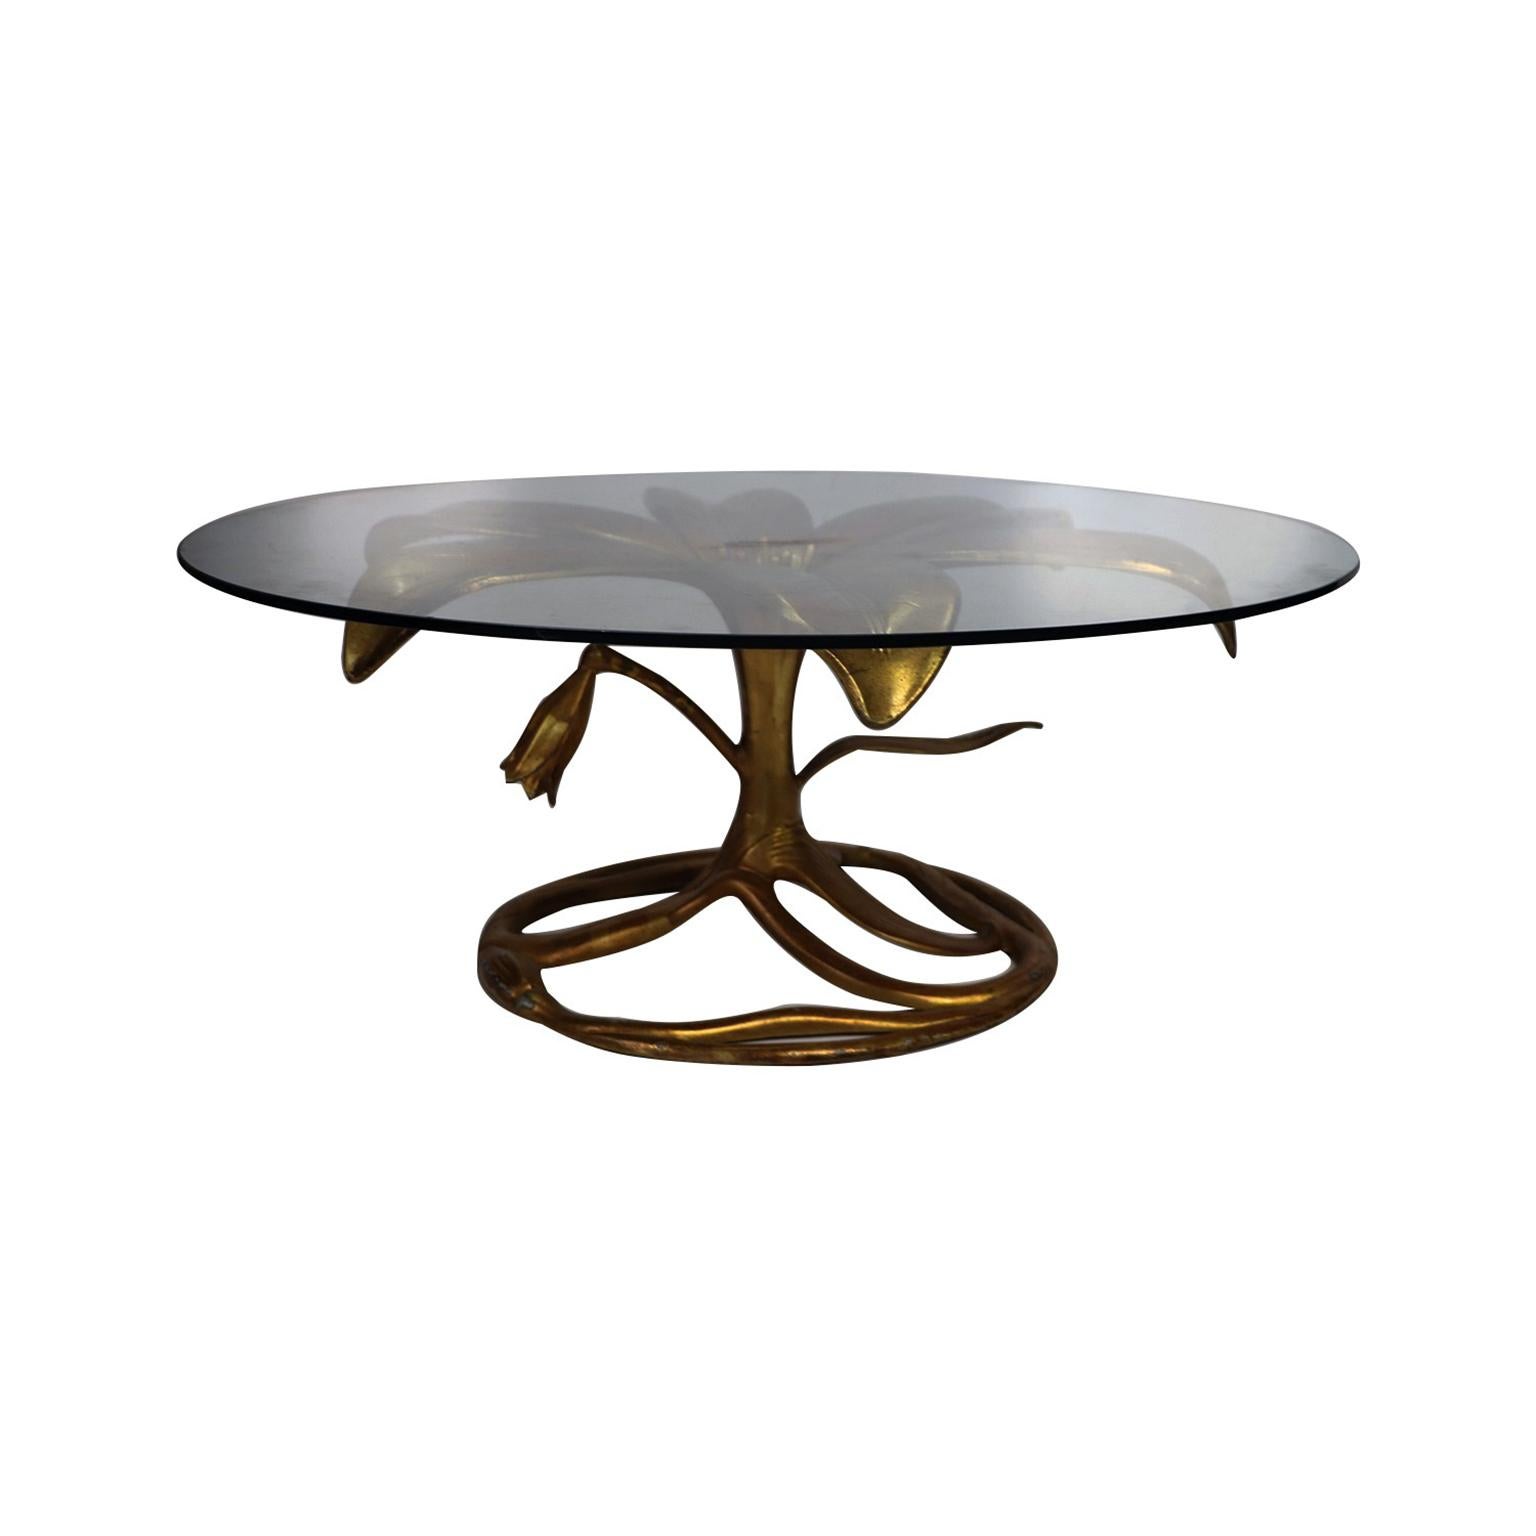 Stunning gilded lily cocktail table with circular glass top by Arthur Court, circa 1970s. This eye-catching conversation piece features a gold cast aluminum base with an open lily bloom supporting a thick glass top above a closed bloom and leaf